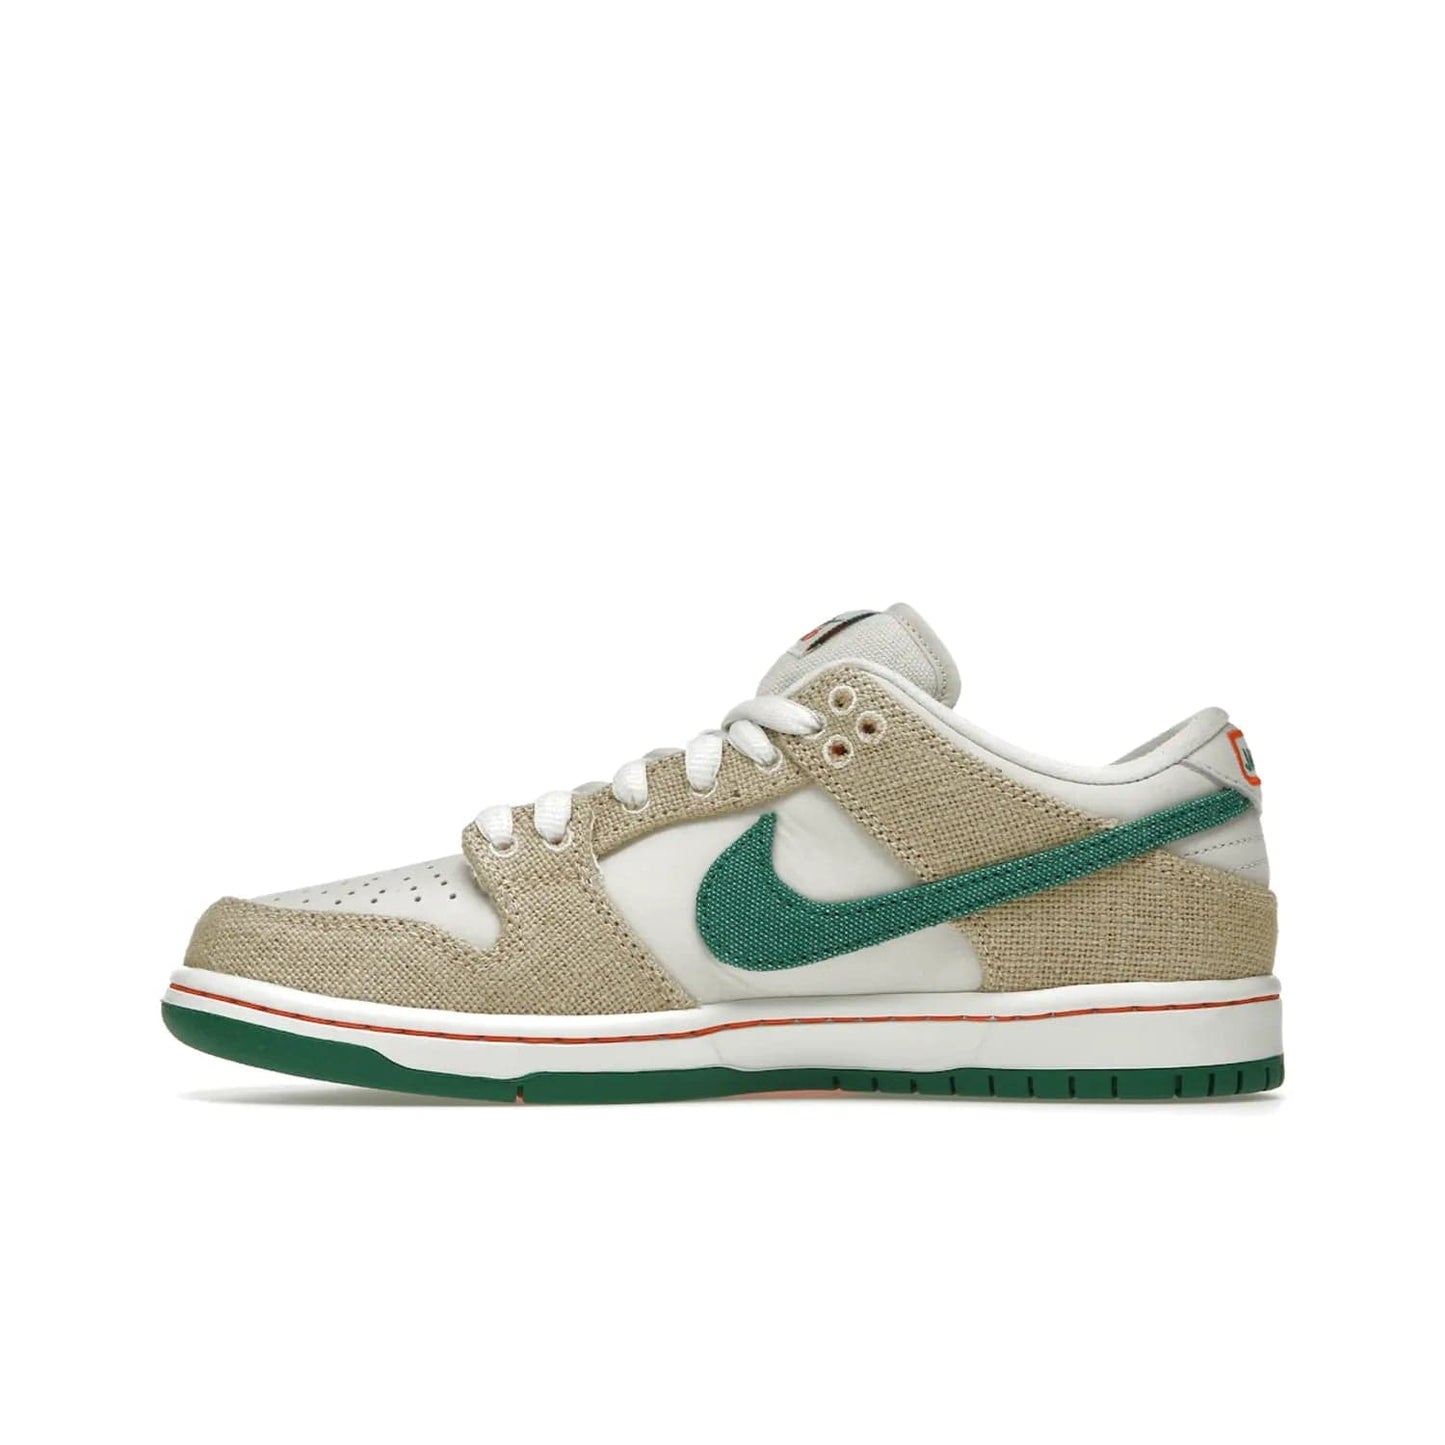 Nike SB Dunk Low Jarritos - Image 19 - Only at www.BallersClubKickz.com - Shop limited edition Nike SB Dunk Low Jarritos! Crafted with white leather and tear-away canvas materials with green accents. Includes orange, green, and white laces to customize your look. Available now.